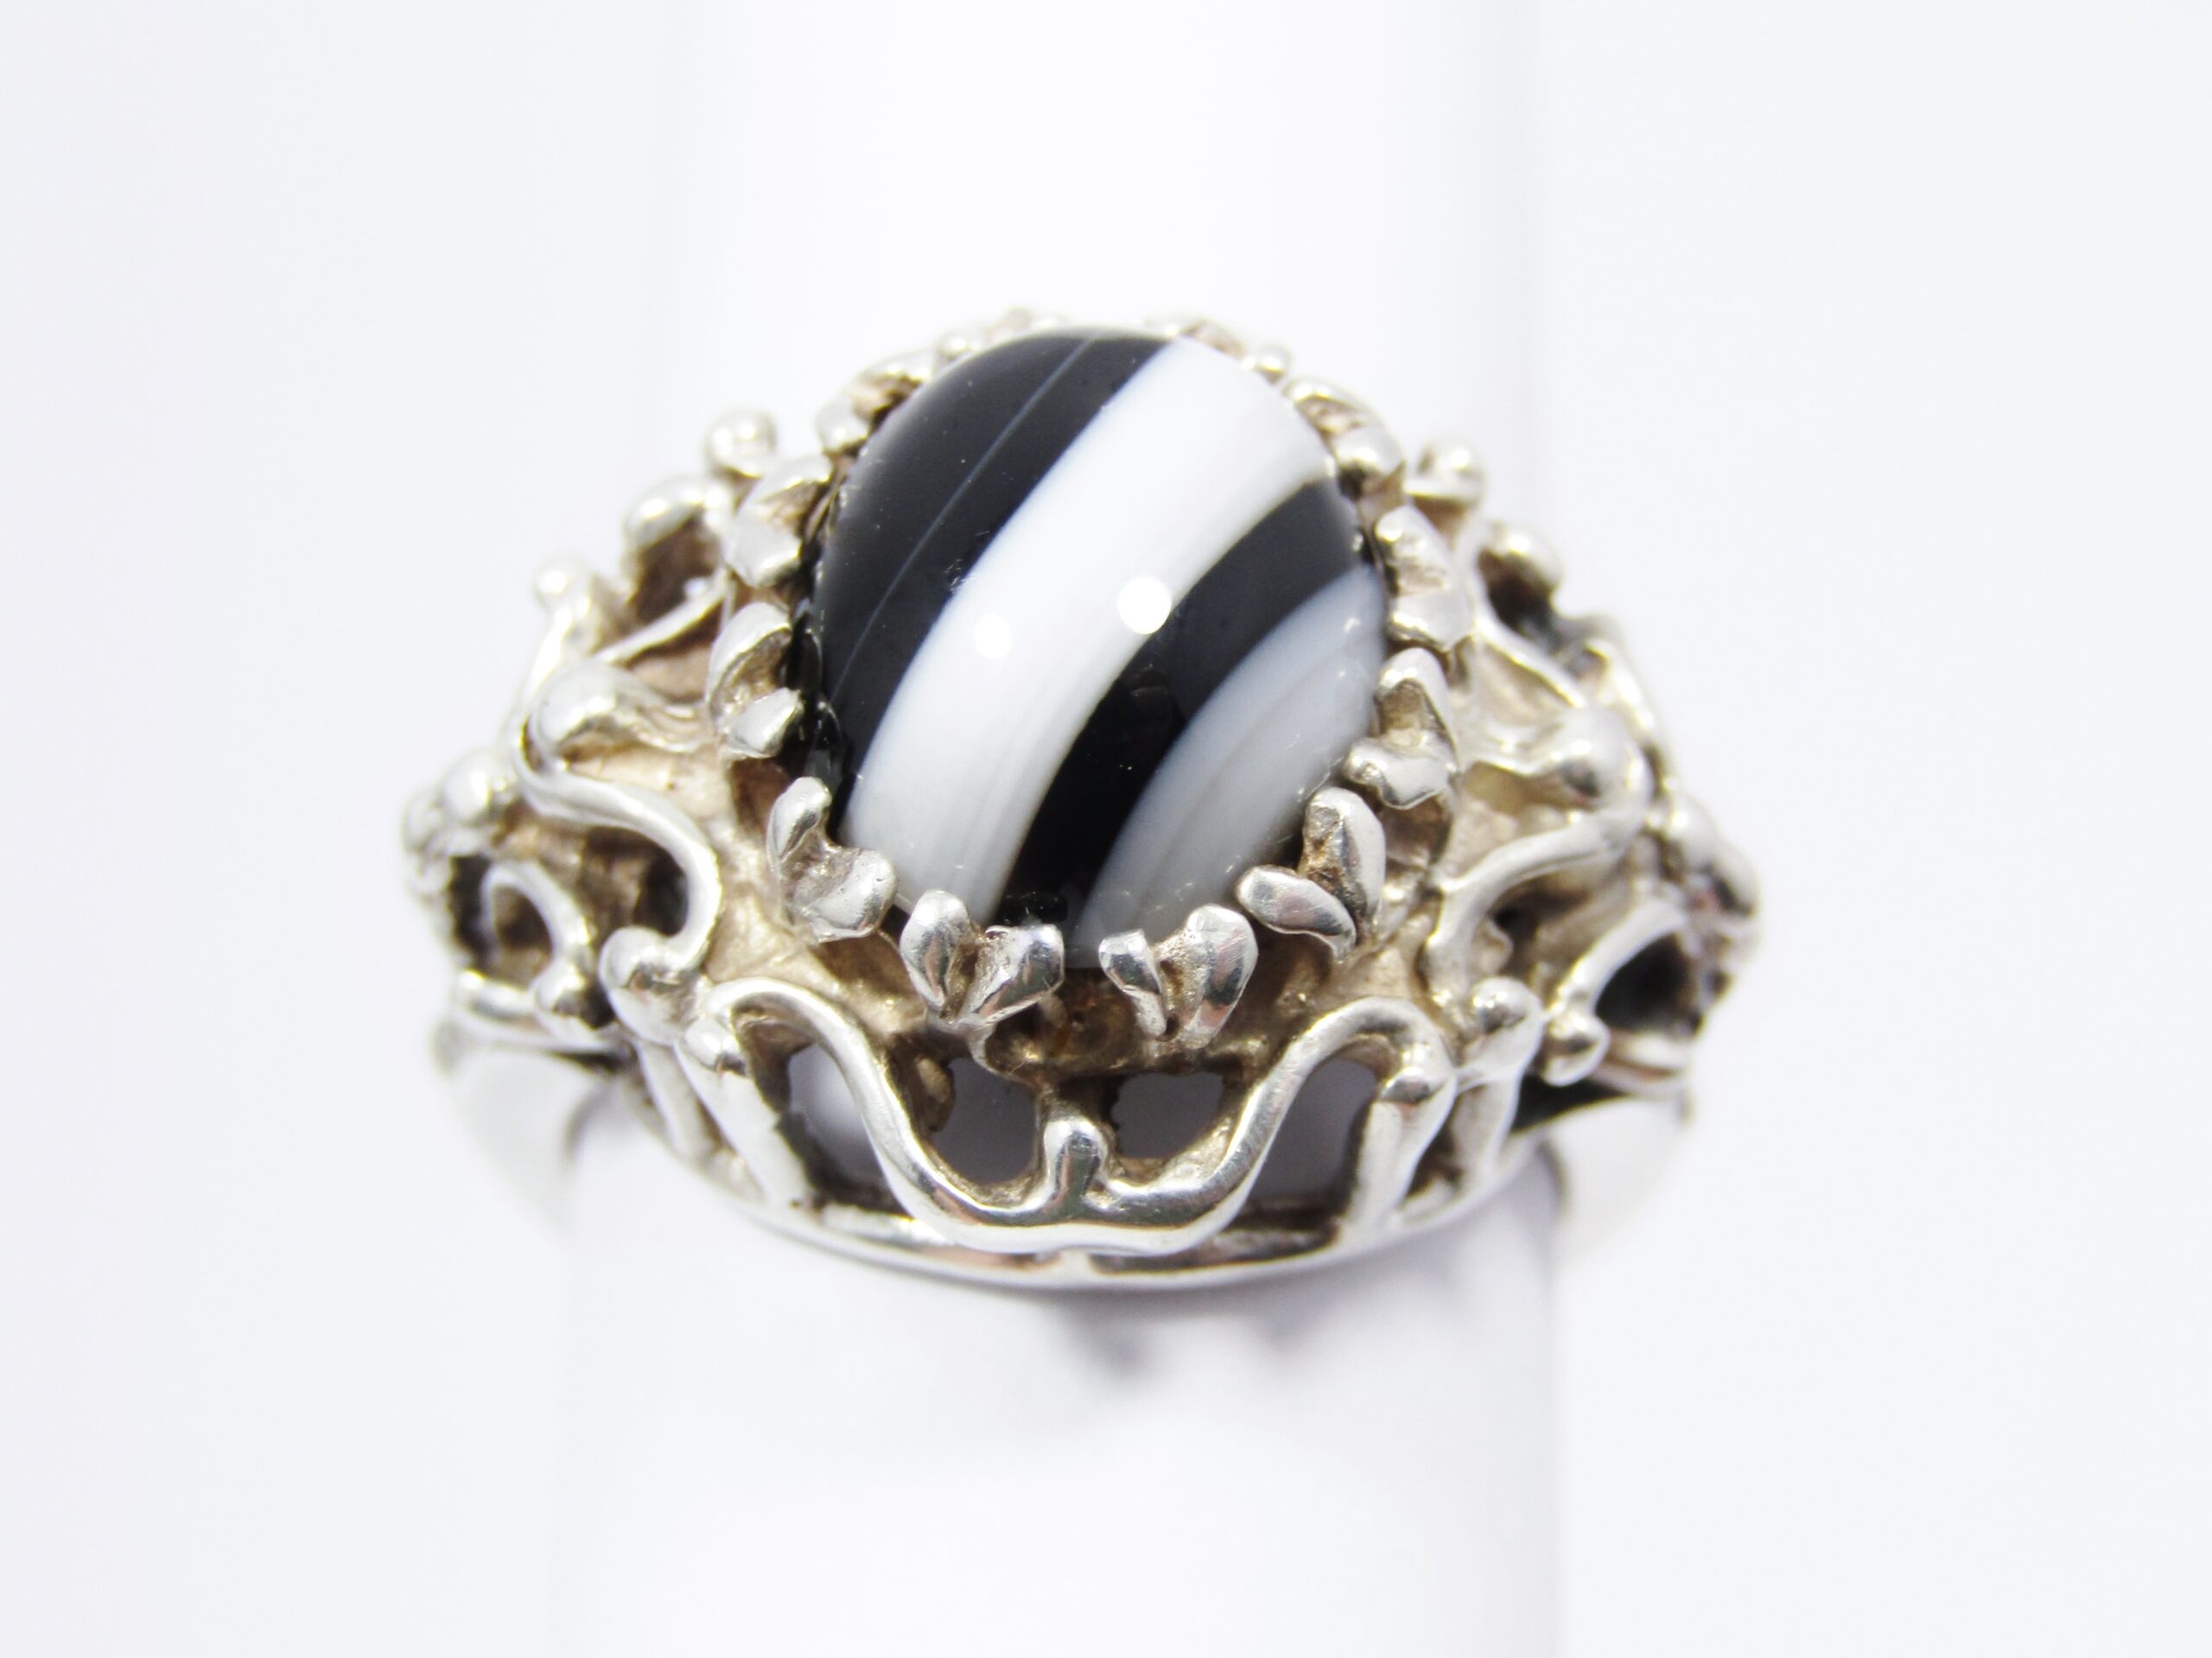 A Stunning Chunky Vintage Design Ring With a Banded Onyx Stone in Sterling Silver.